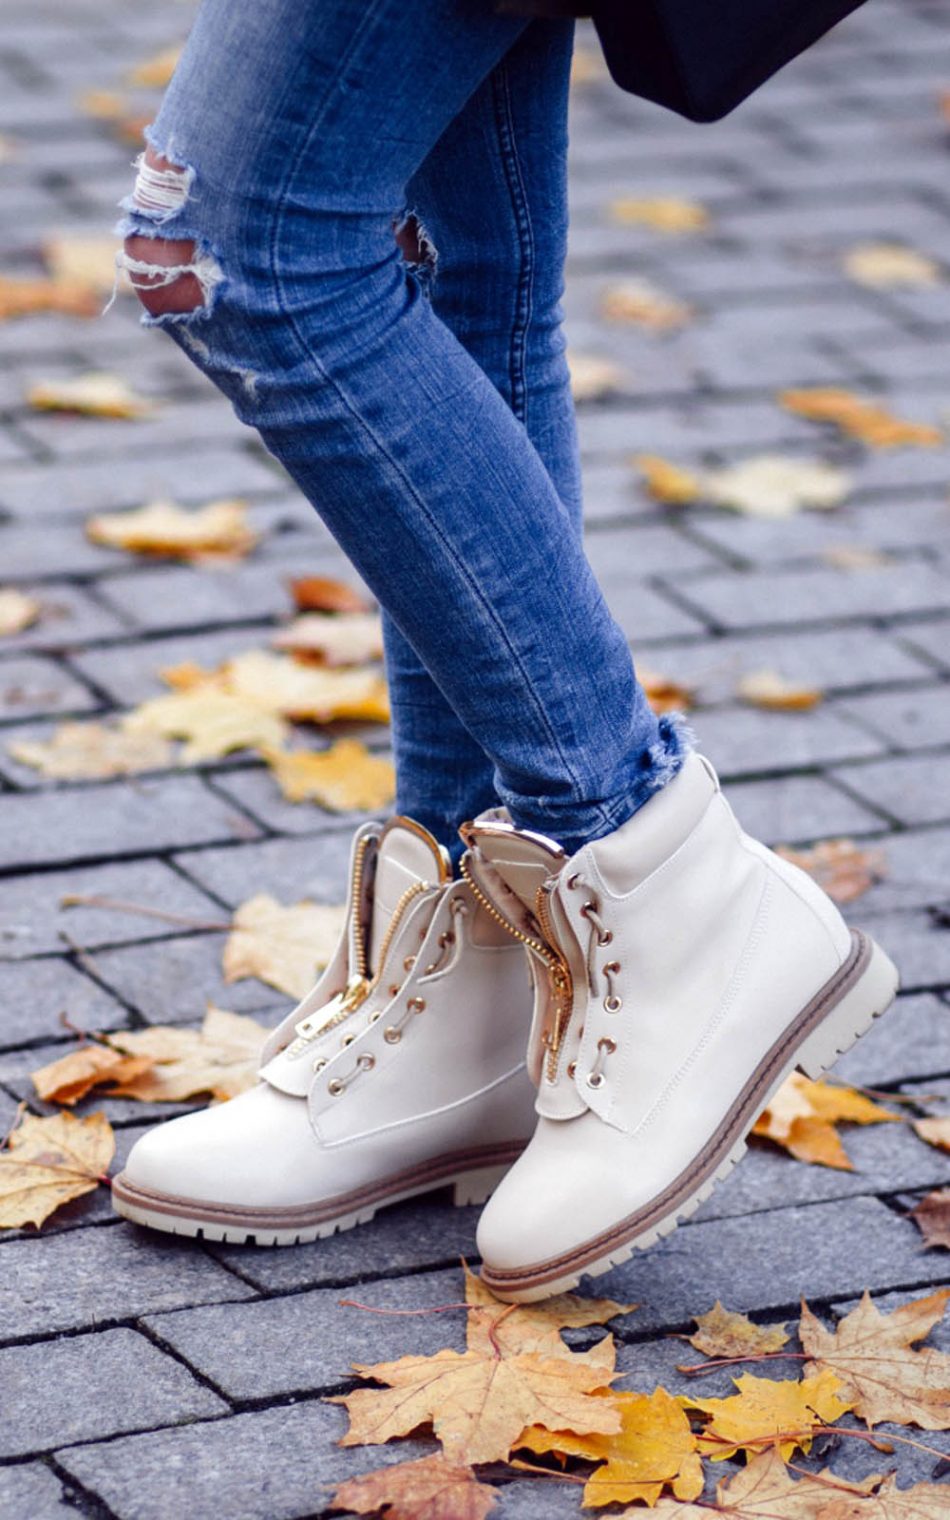 Girl Jeans Shoes Autumn HD Mobile Wallpaper